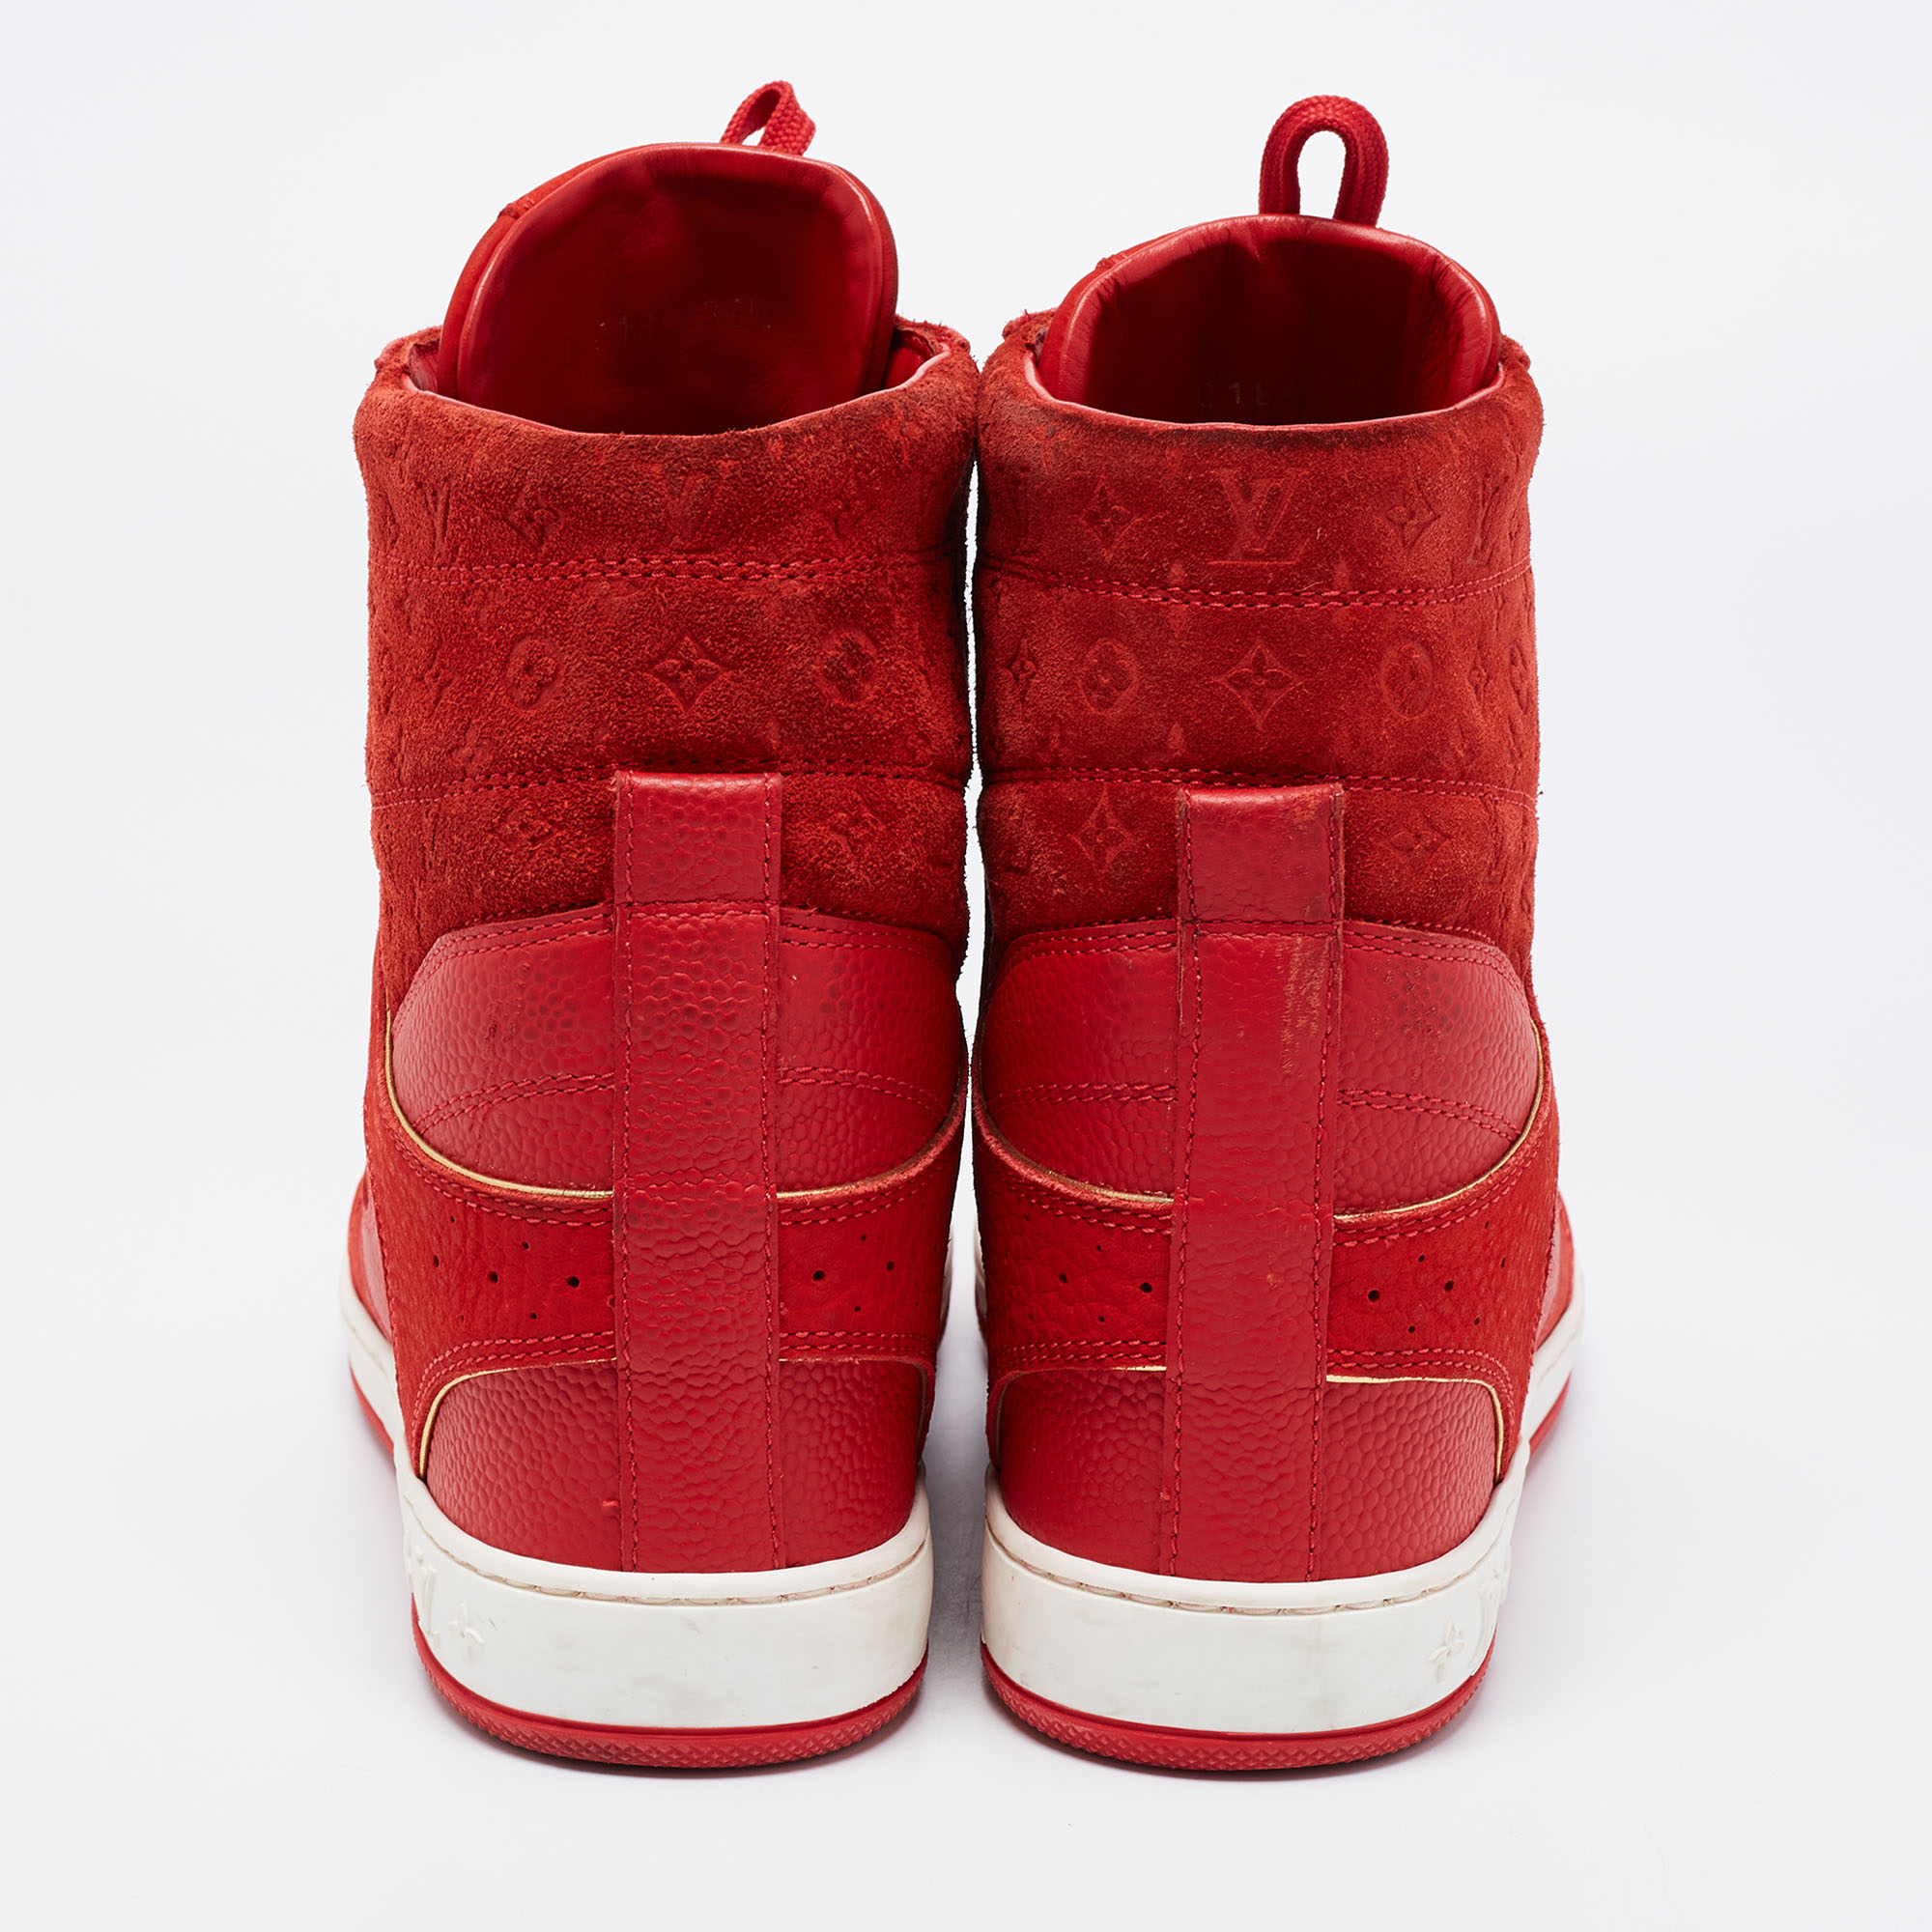 Louis Vuitton Red Leather And Embossed Monogram Suede Millenium Wedge Sneakers Size 39.5